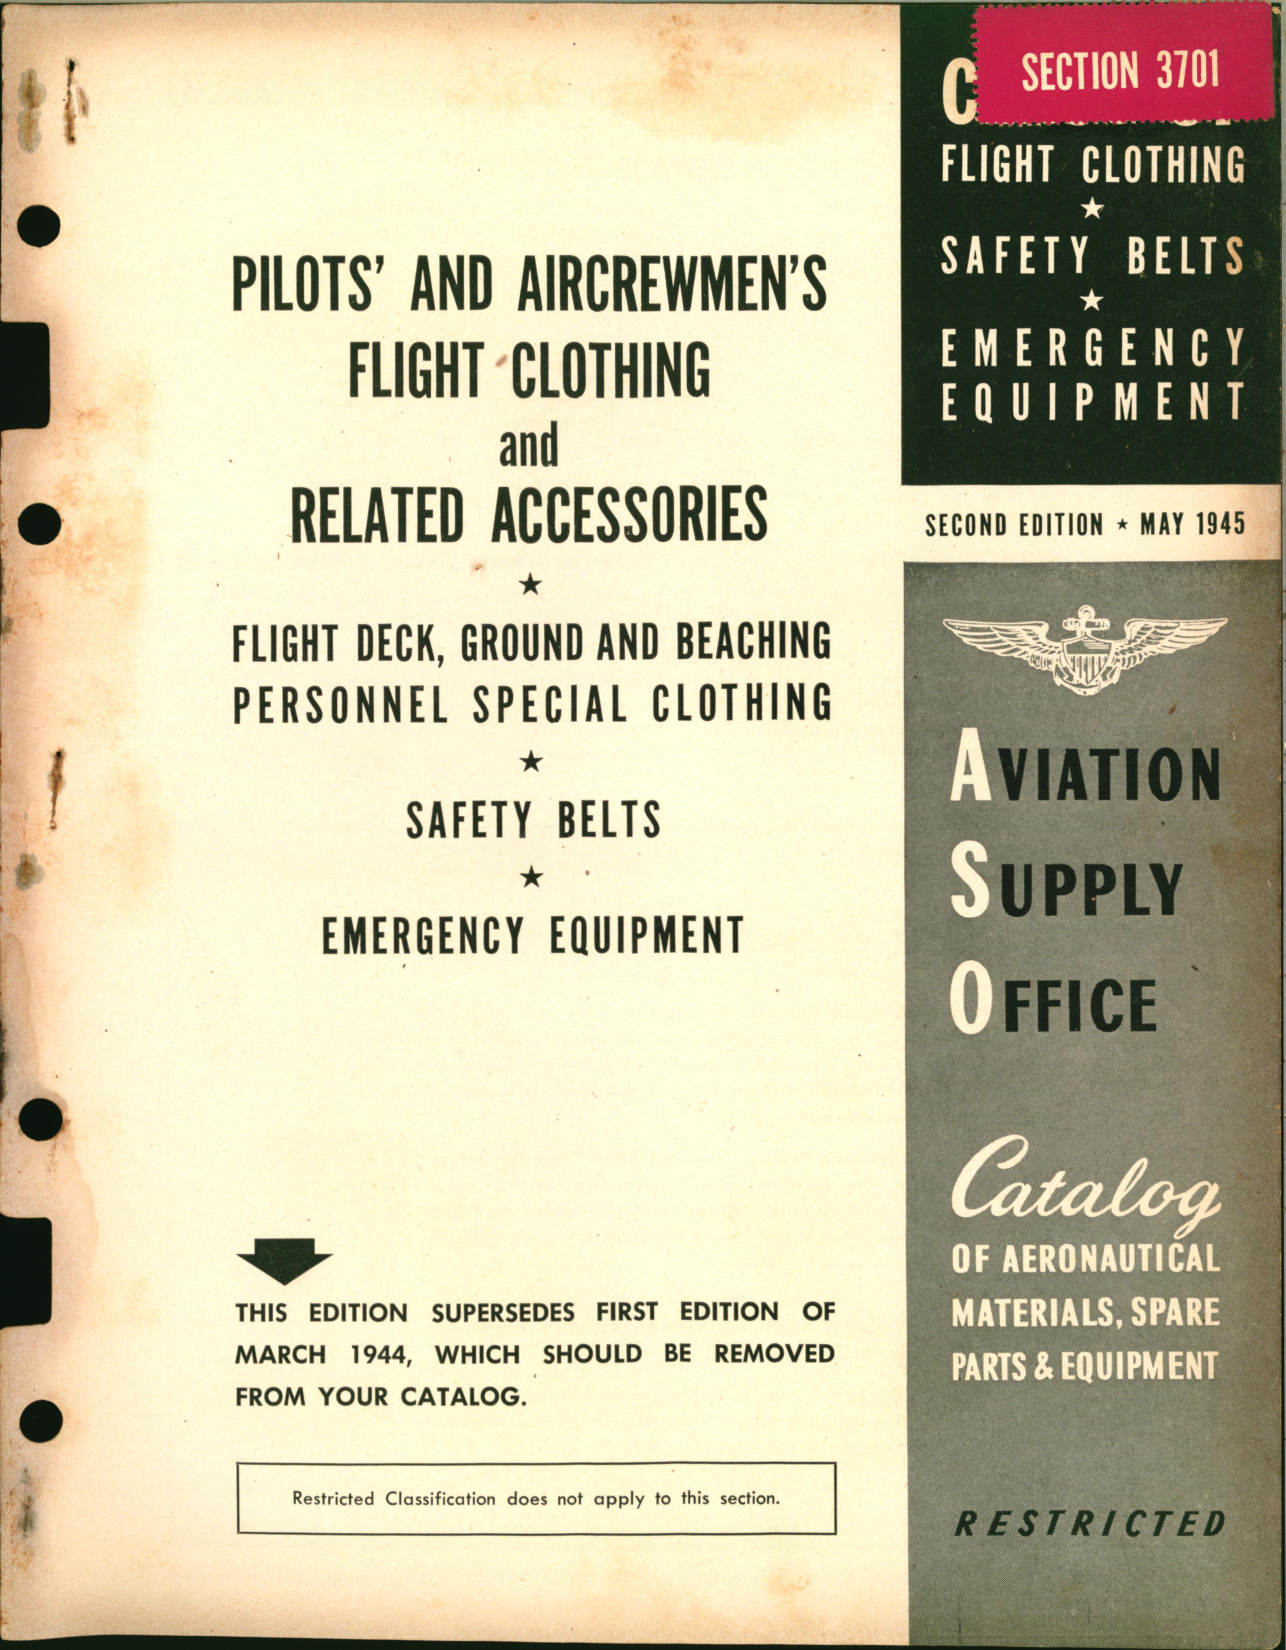 Sample page 1 from AirCorps Library document: Pilots' and Aircrewmen's Flight Clothing and Related Accessories